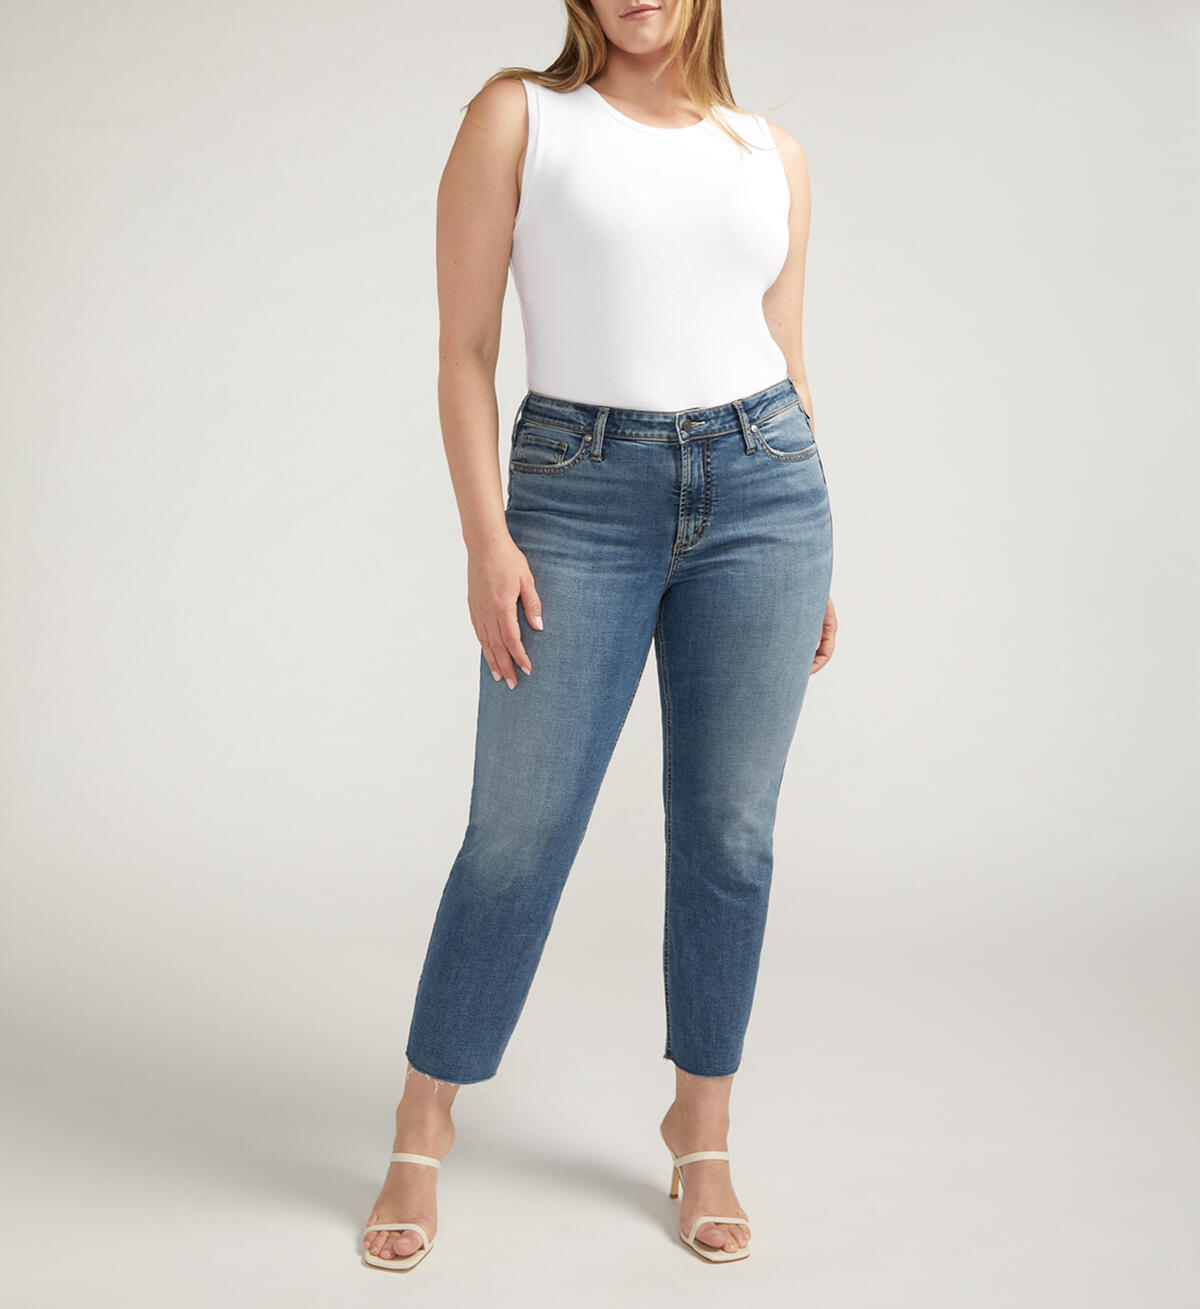 Most Wanted Mid Rise Straight Jeans Plus Size, , hi-res image number 0